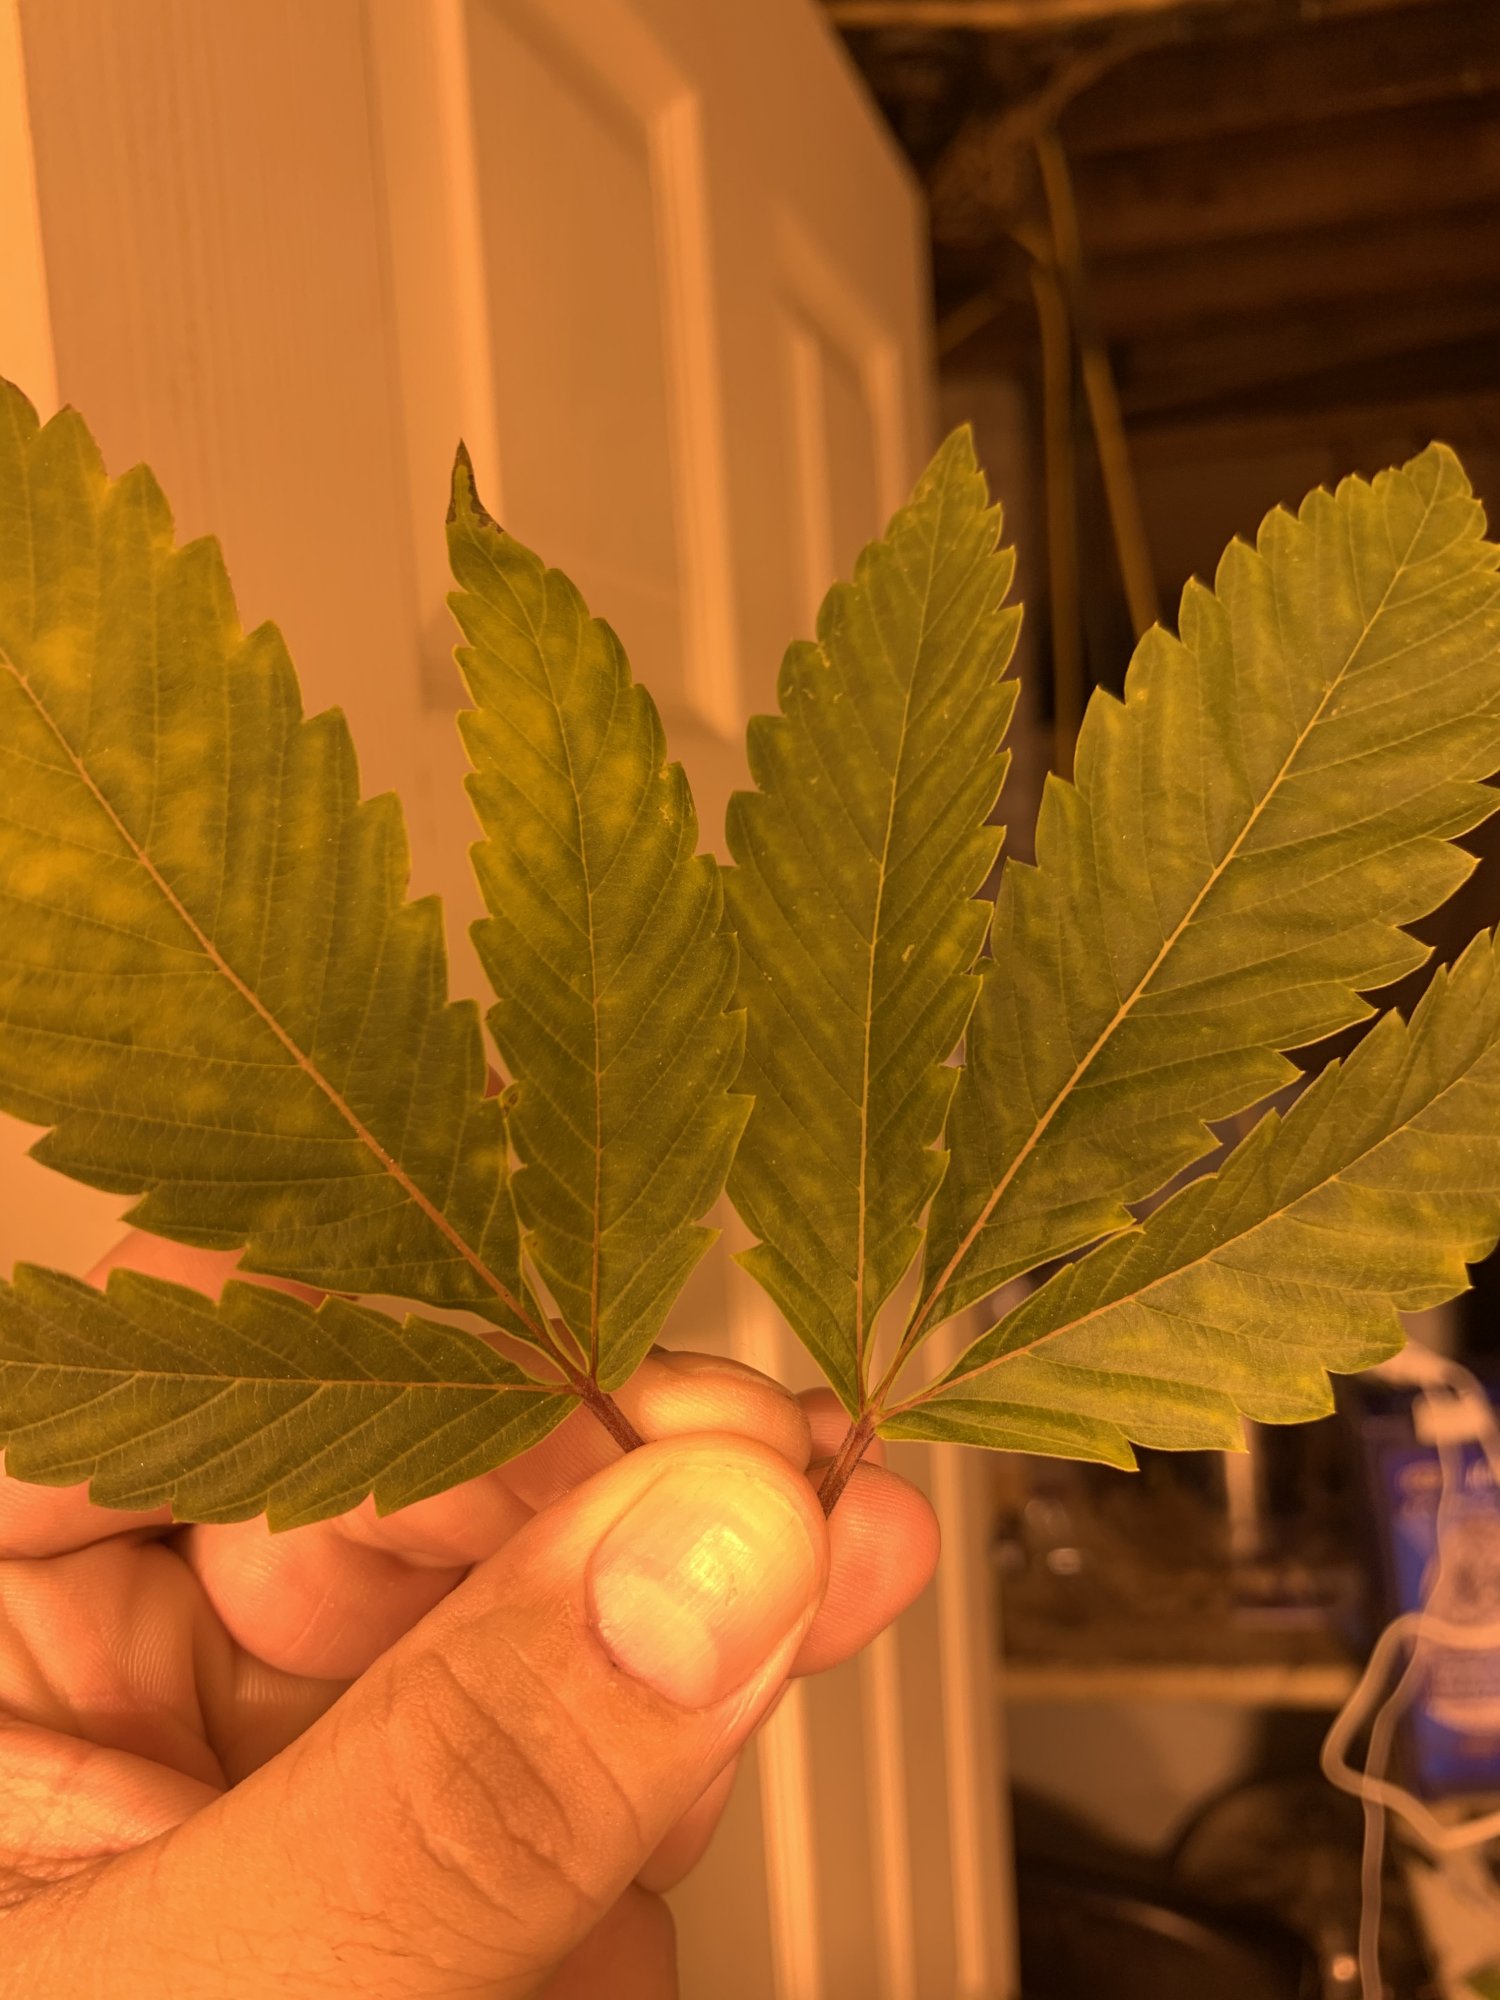 Deficiency could use advice 3